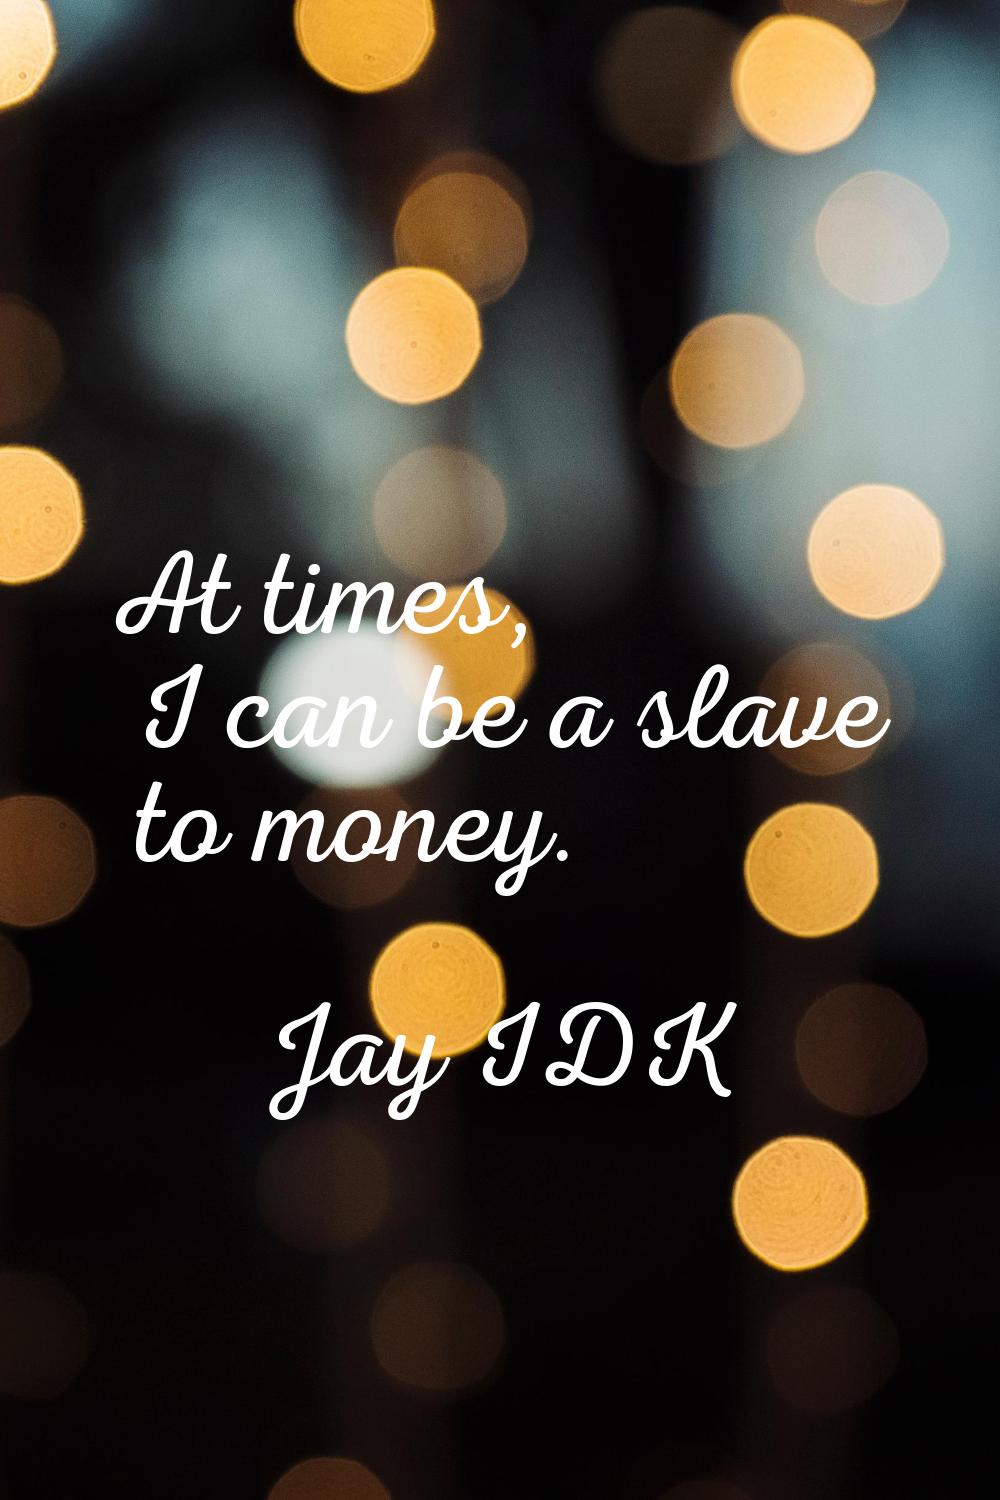 At times, I can be a slave to money.